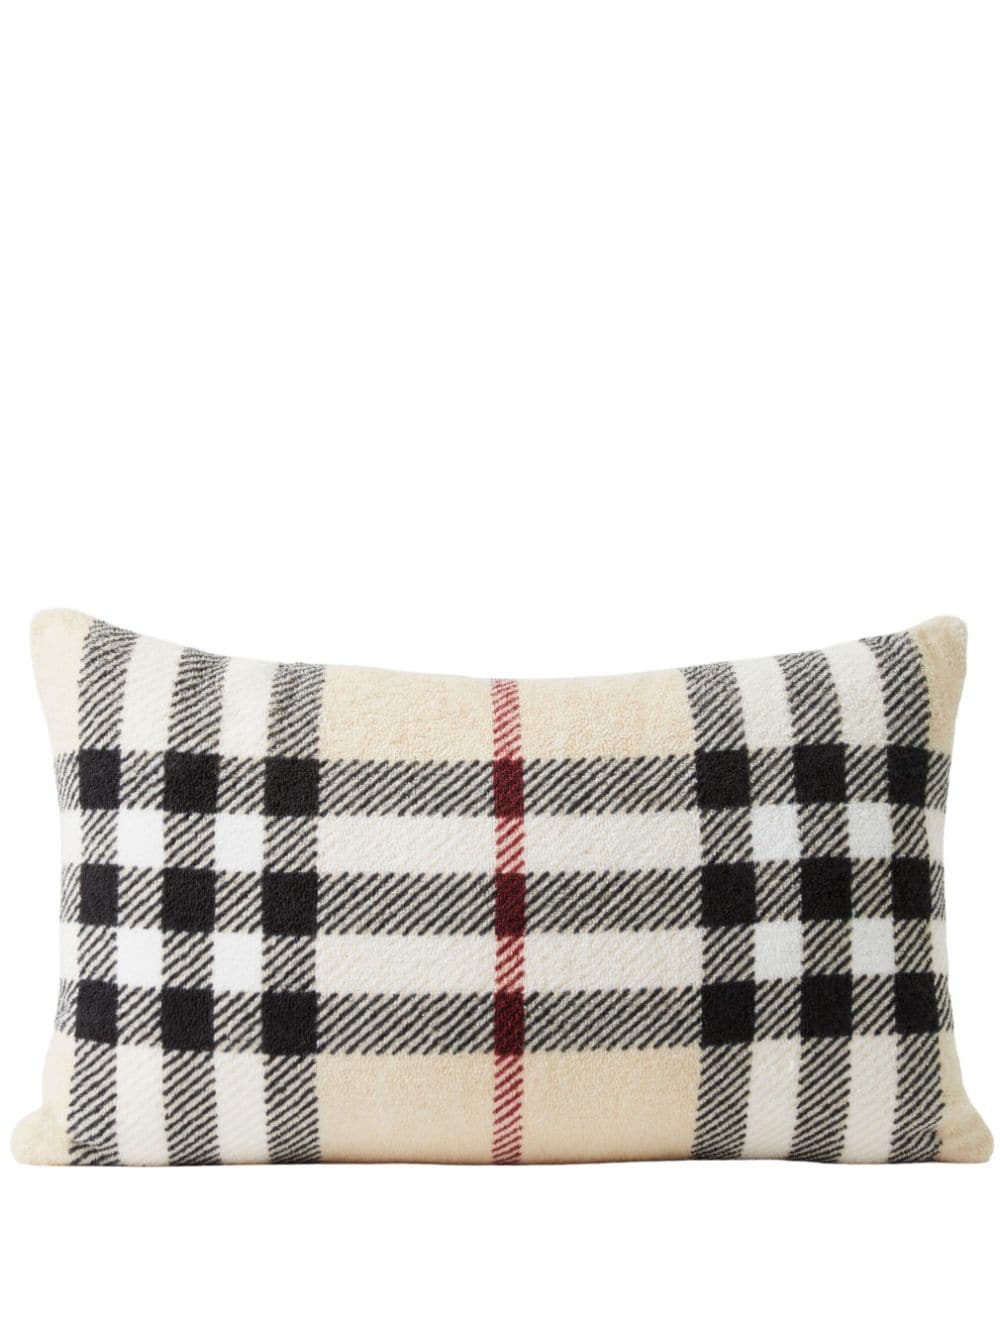 Burberry Vintage Check-pattern Cotton Cushion In Neutrals